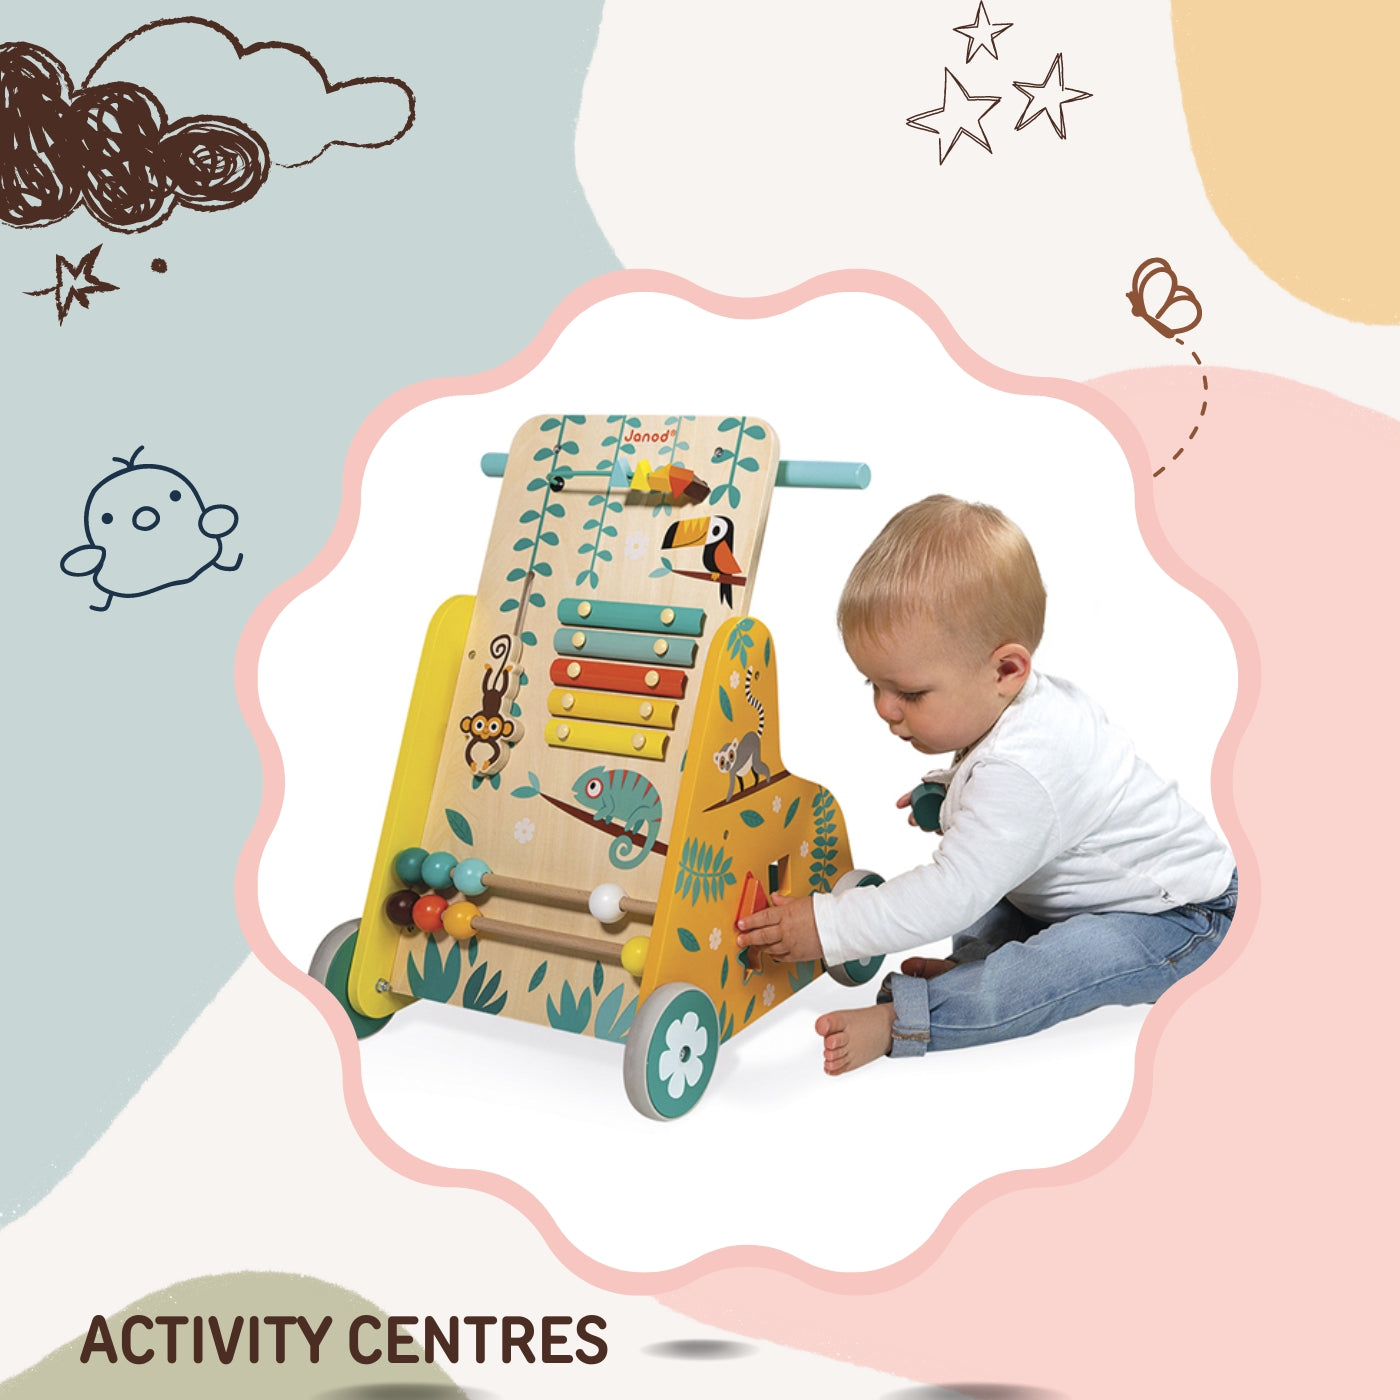 Why Toy Activity Centres Are Not Just Fun, But Also A Critical Tool For Child Development